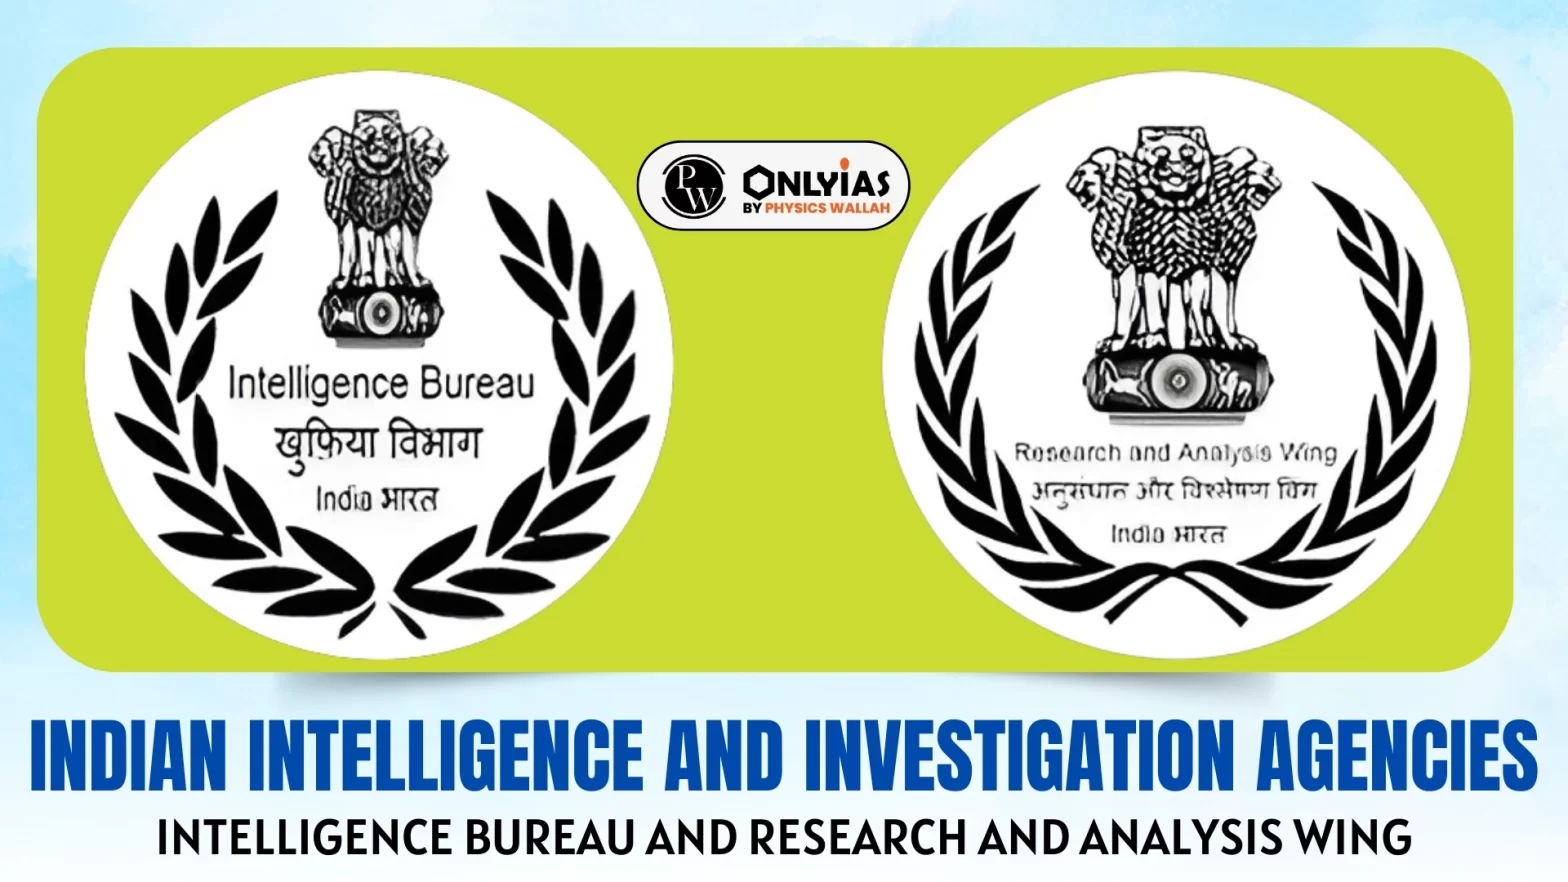 Indian Intelligence and Investigation Agencies: Intelligence Bureau and Research and Analysis Wing